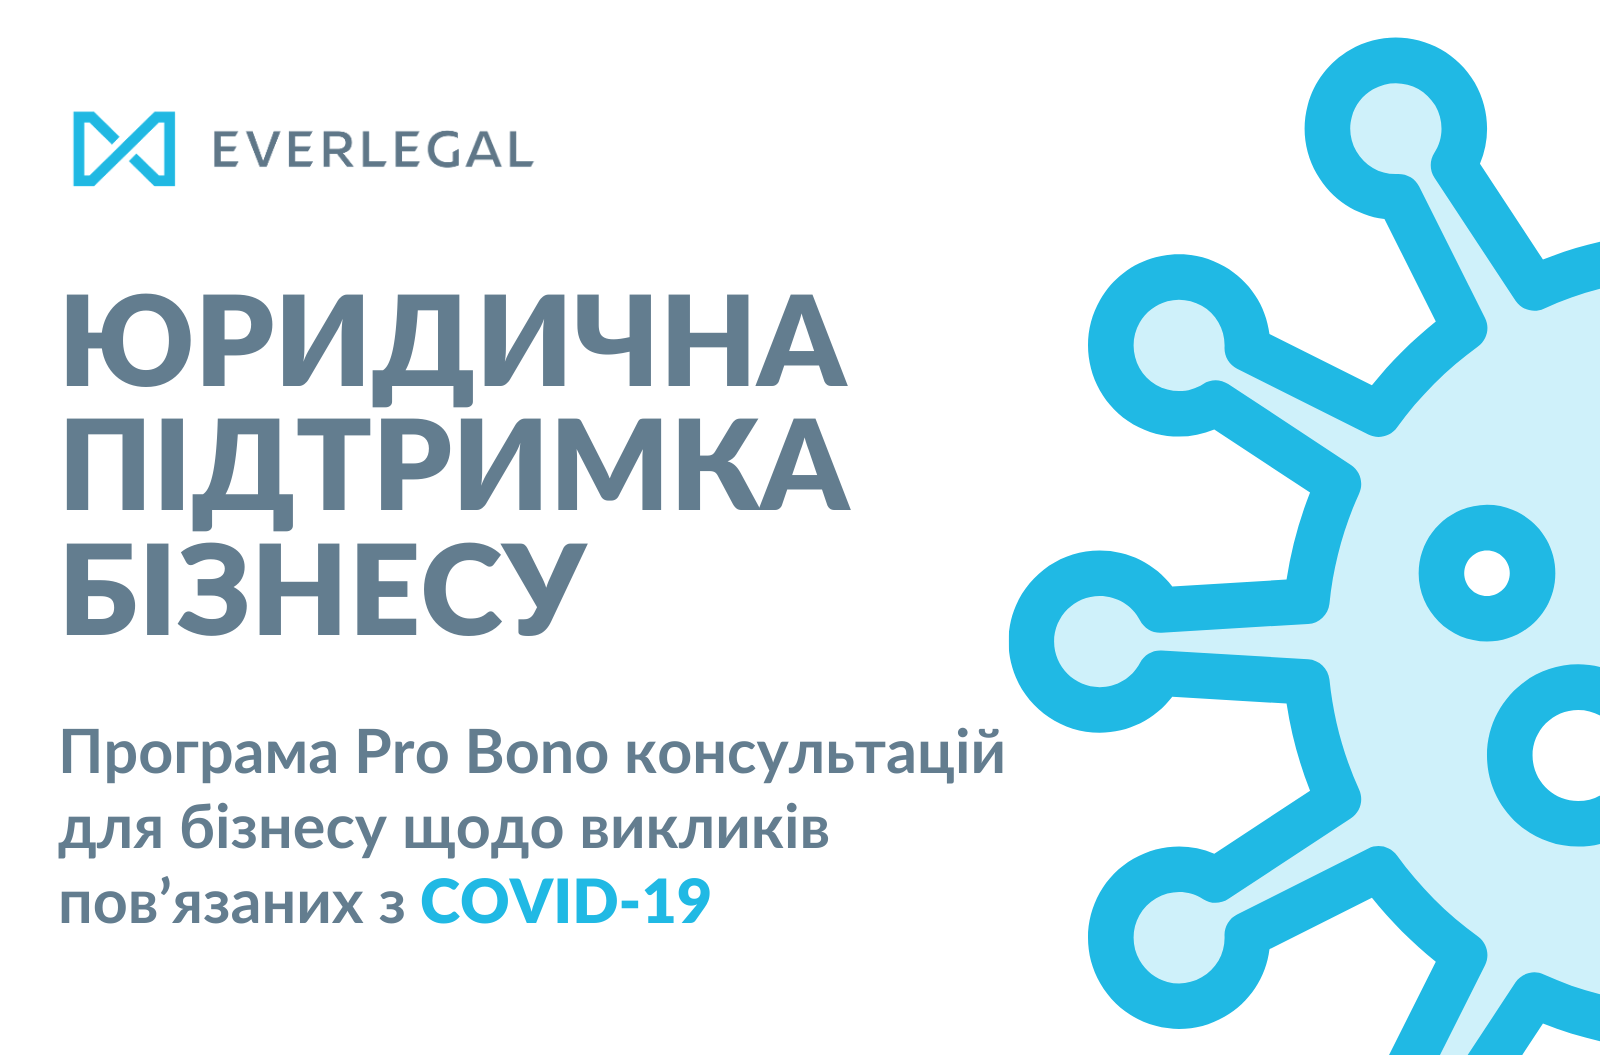 EVERLEGAL continues supporting business in Ukraine 